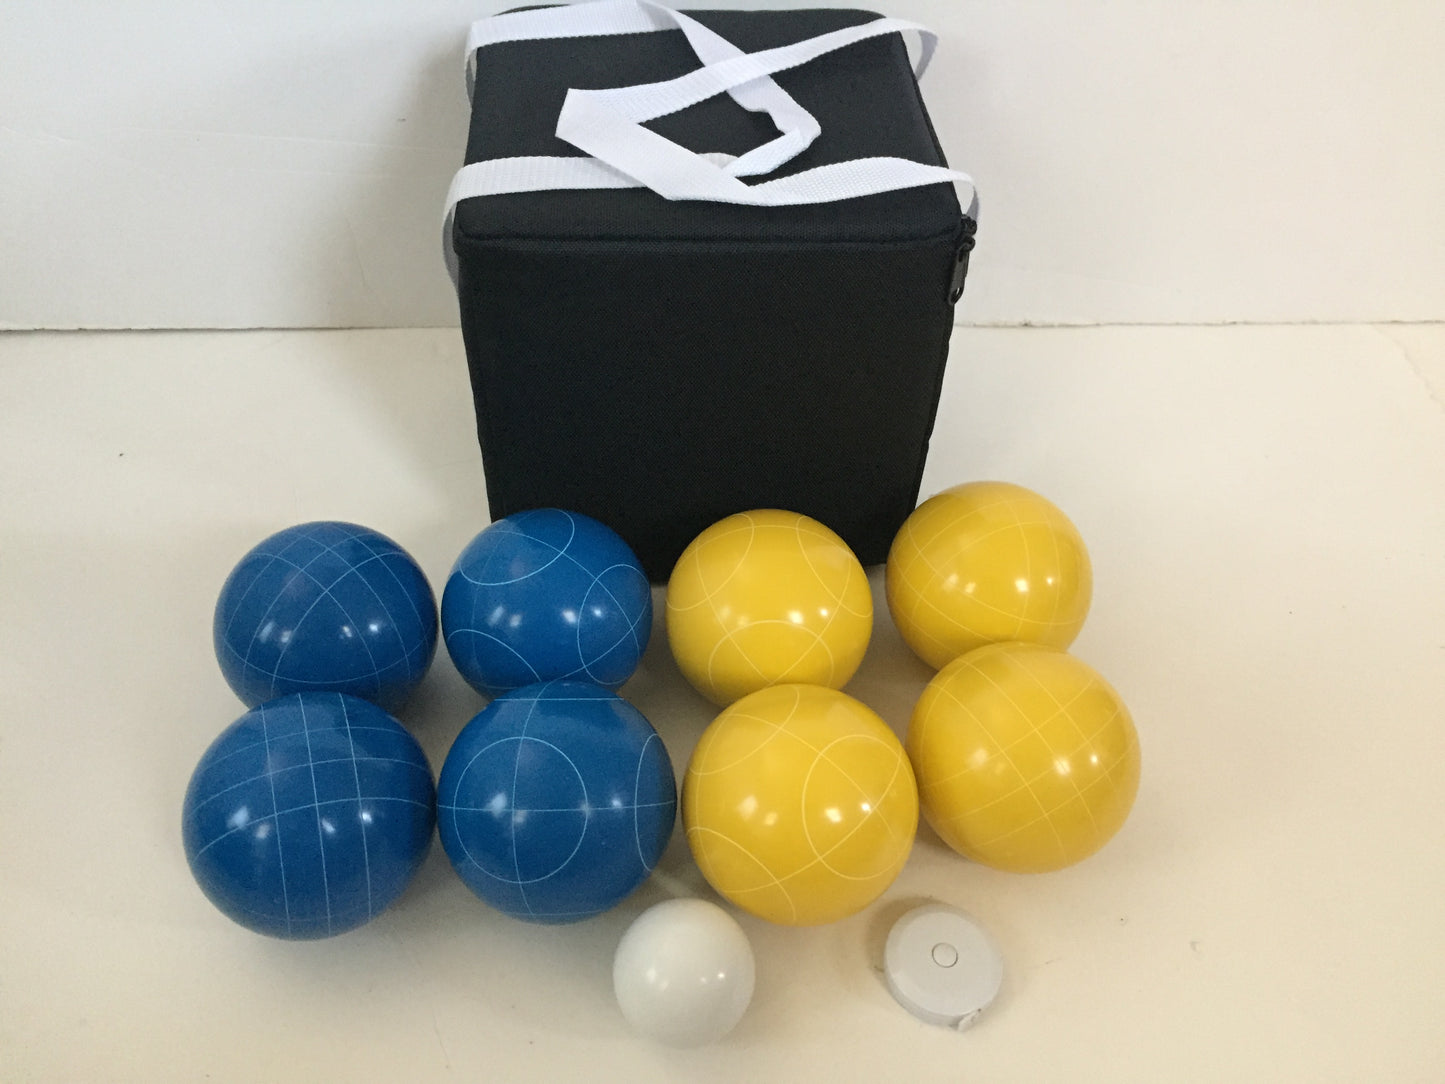 107mm with Blue and Yellow Balls with Black Bag